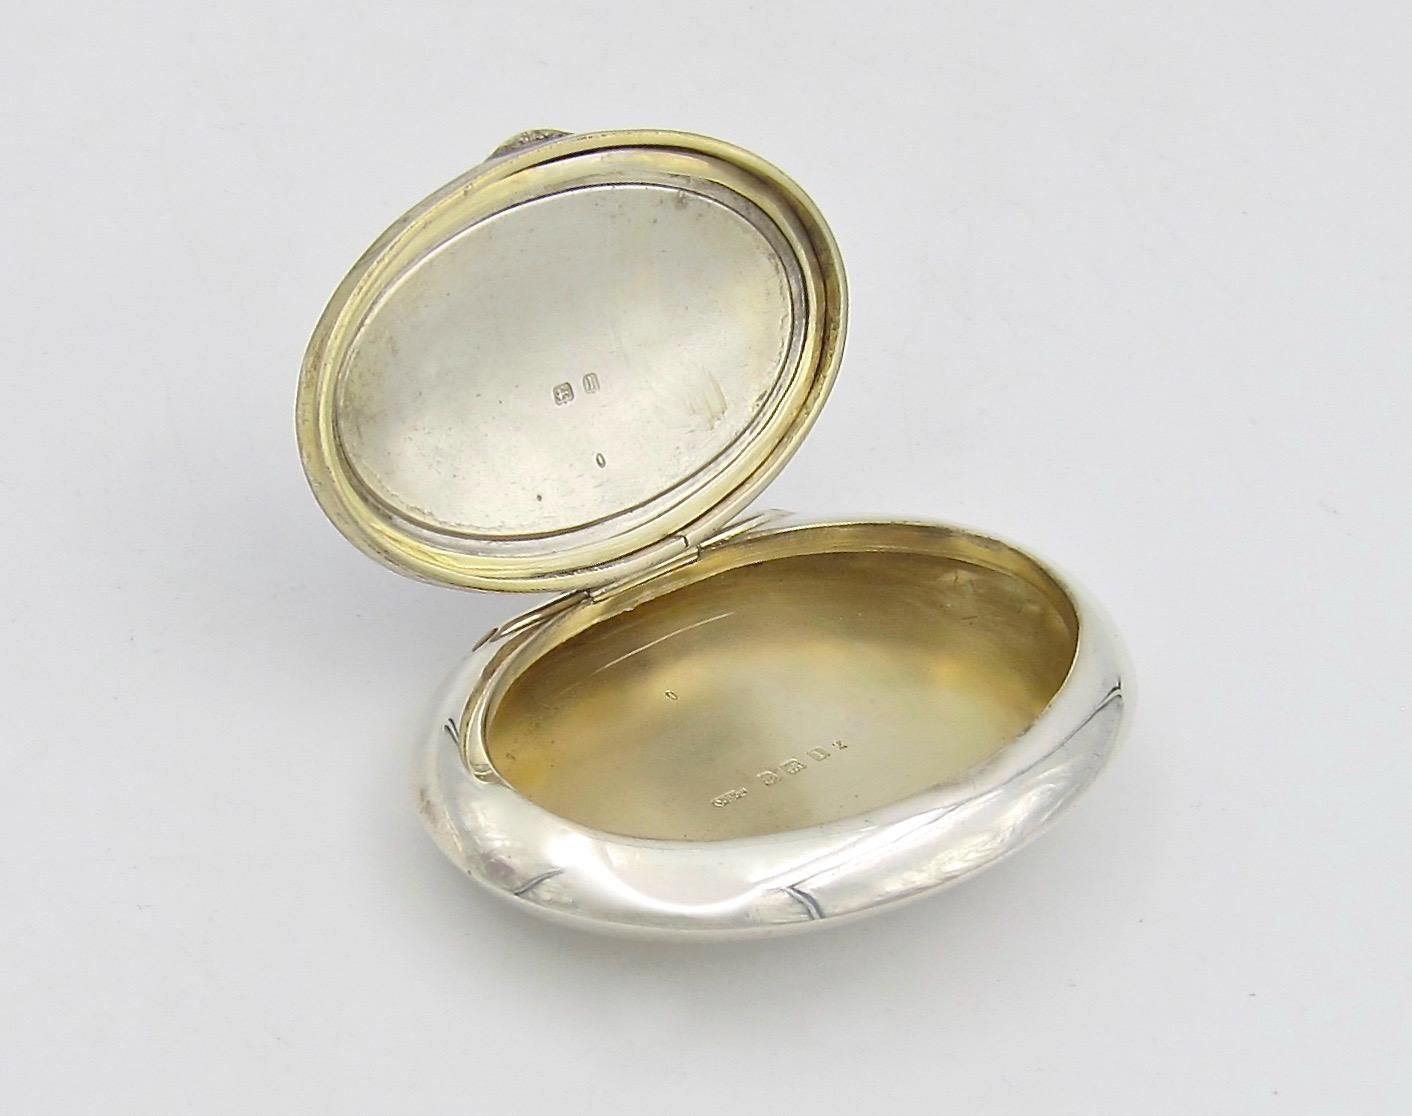 20th Century Sterling Silver and Enamel Oval Box by Charles Edwin Turner, Birmingham, 1910